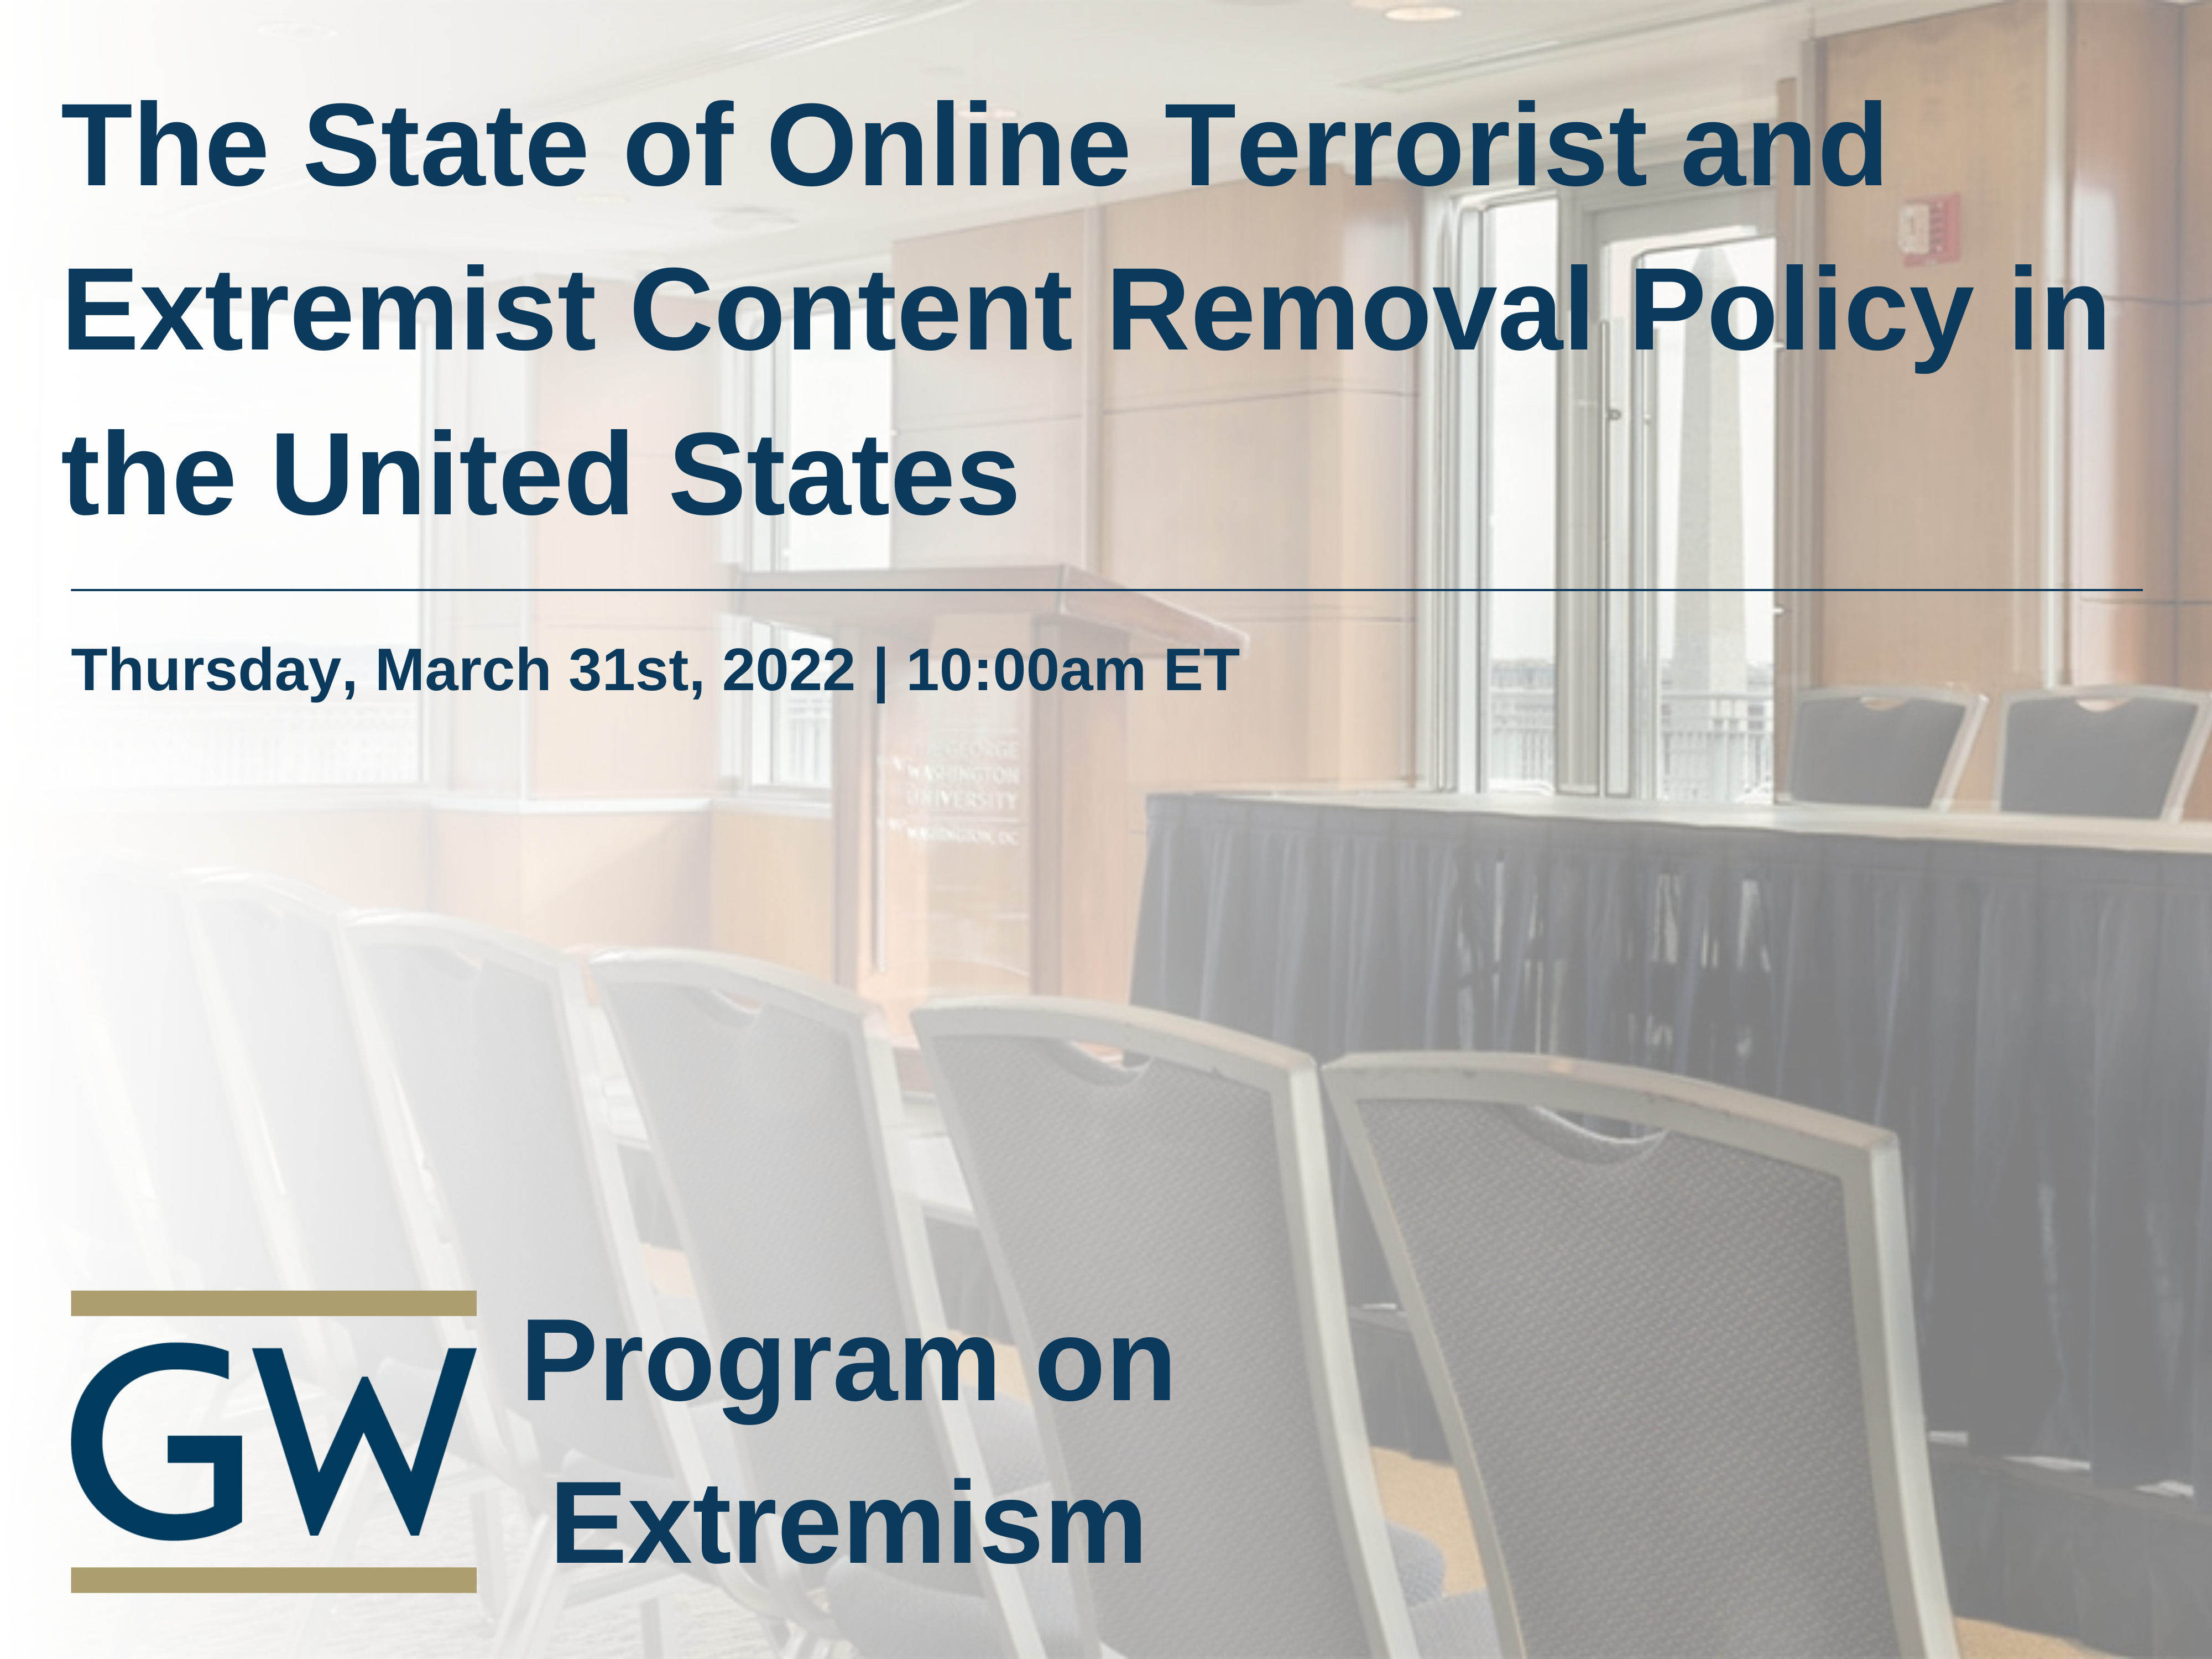 The State of Online Terrorist and Extremist Content Removal Policy in the United States Event Bannner